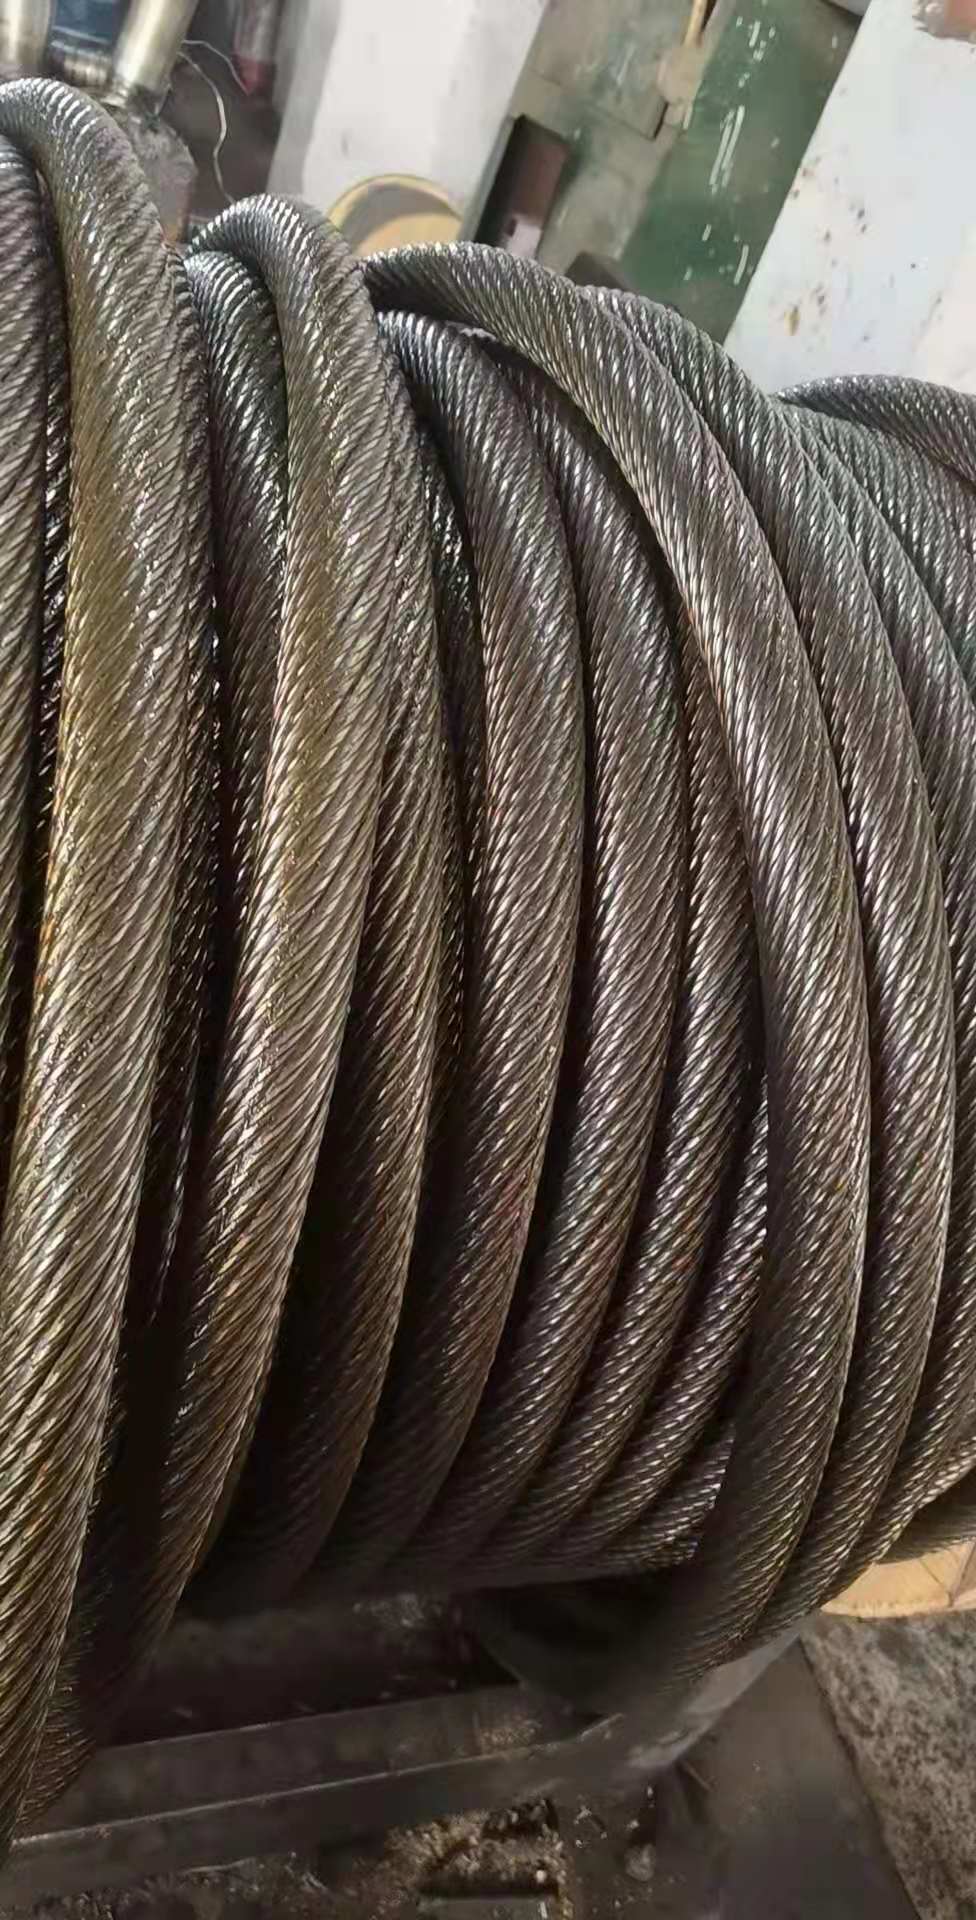 Rotation Resistant Compacted Wire Rope 35wxk7 for Cranes